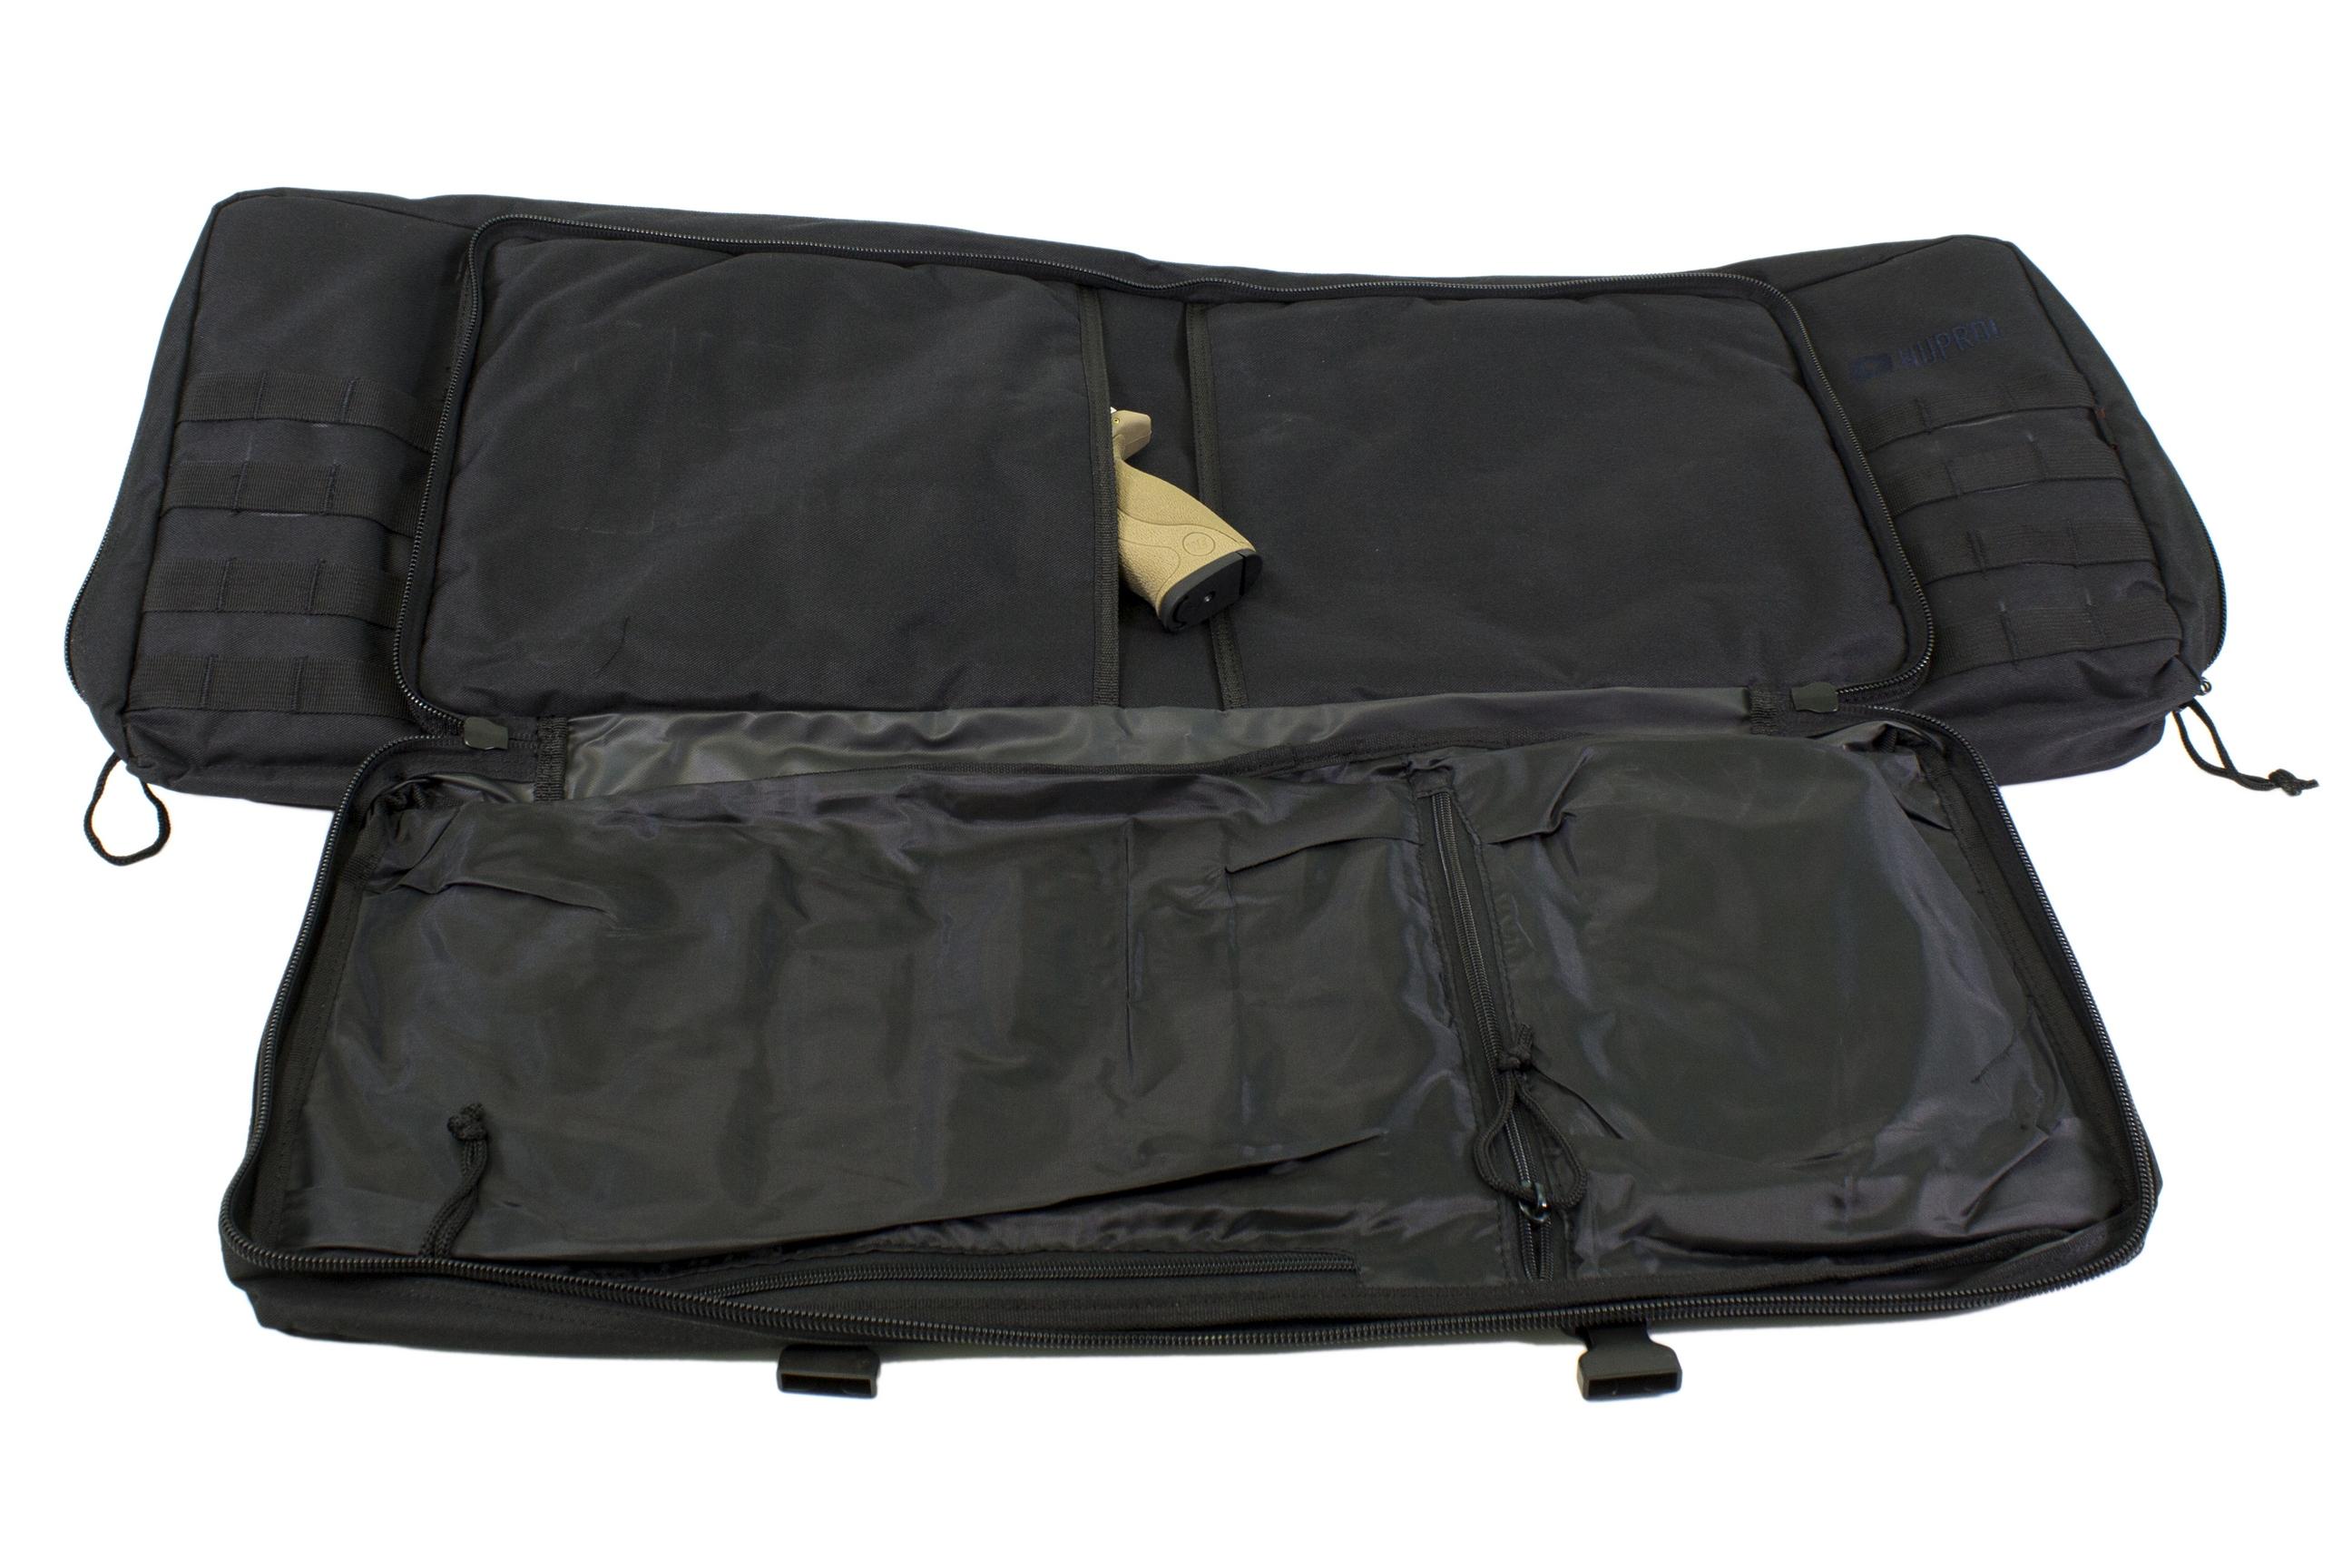 NUPROL NP Soft Riffle Bag PMC Deluxe  42"